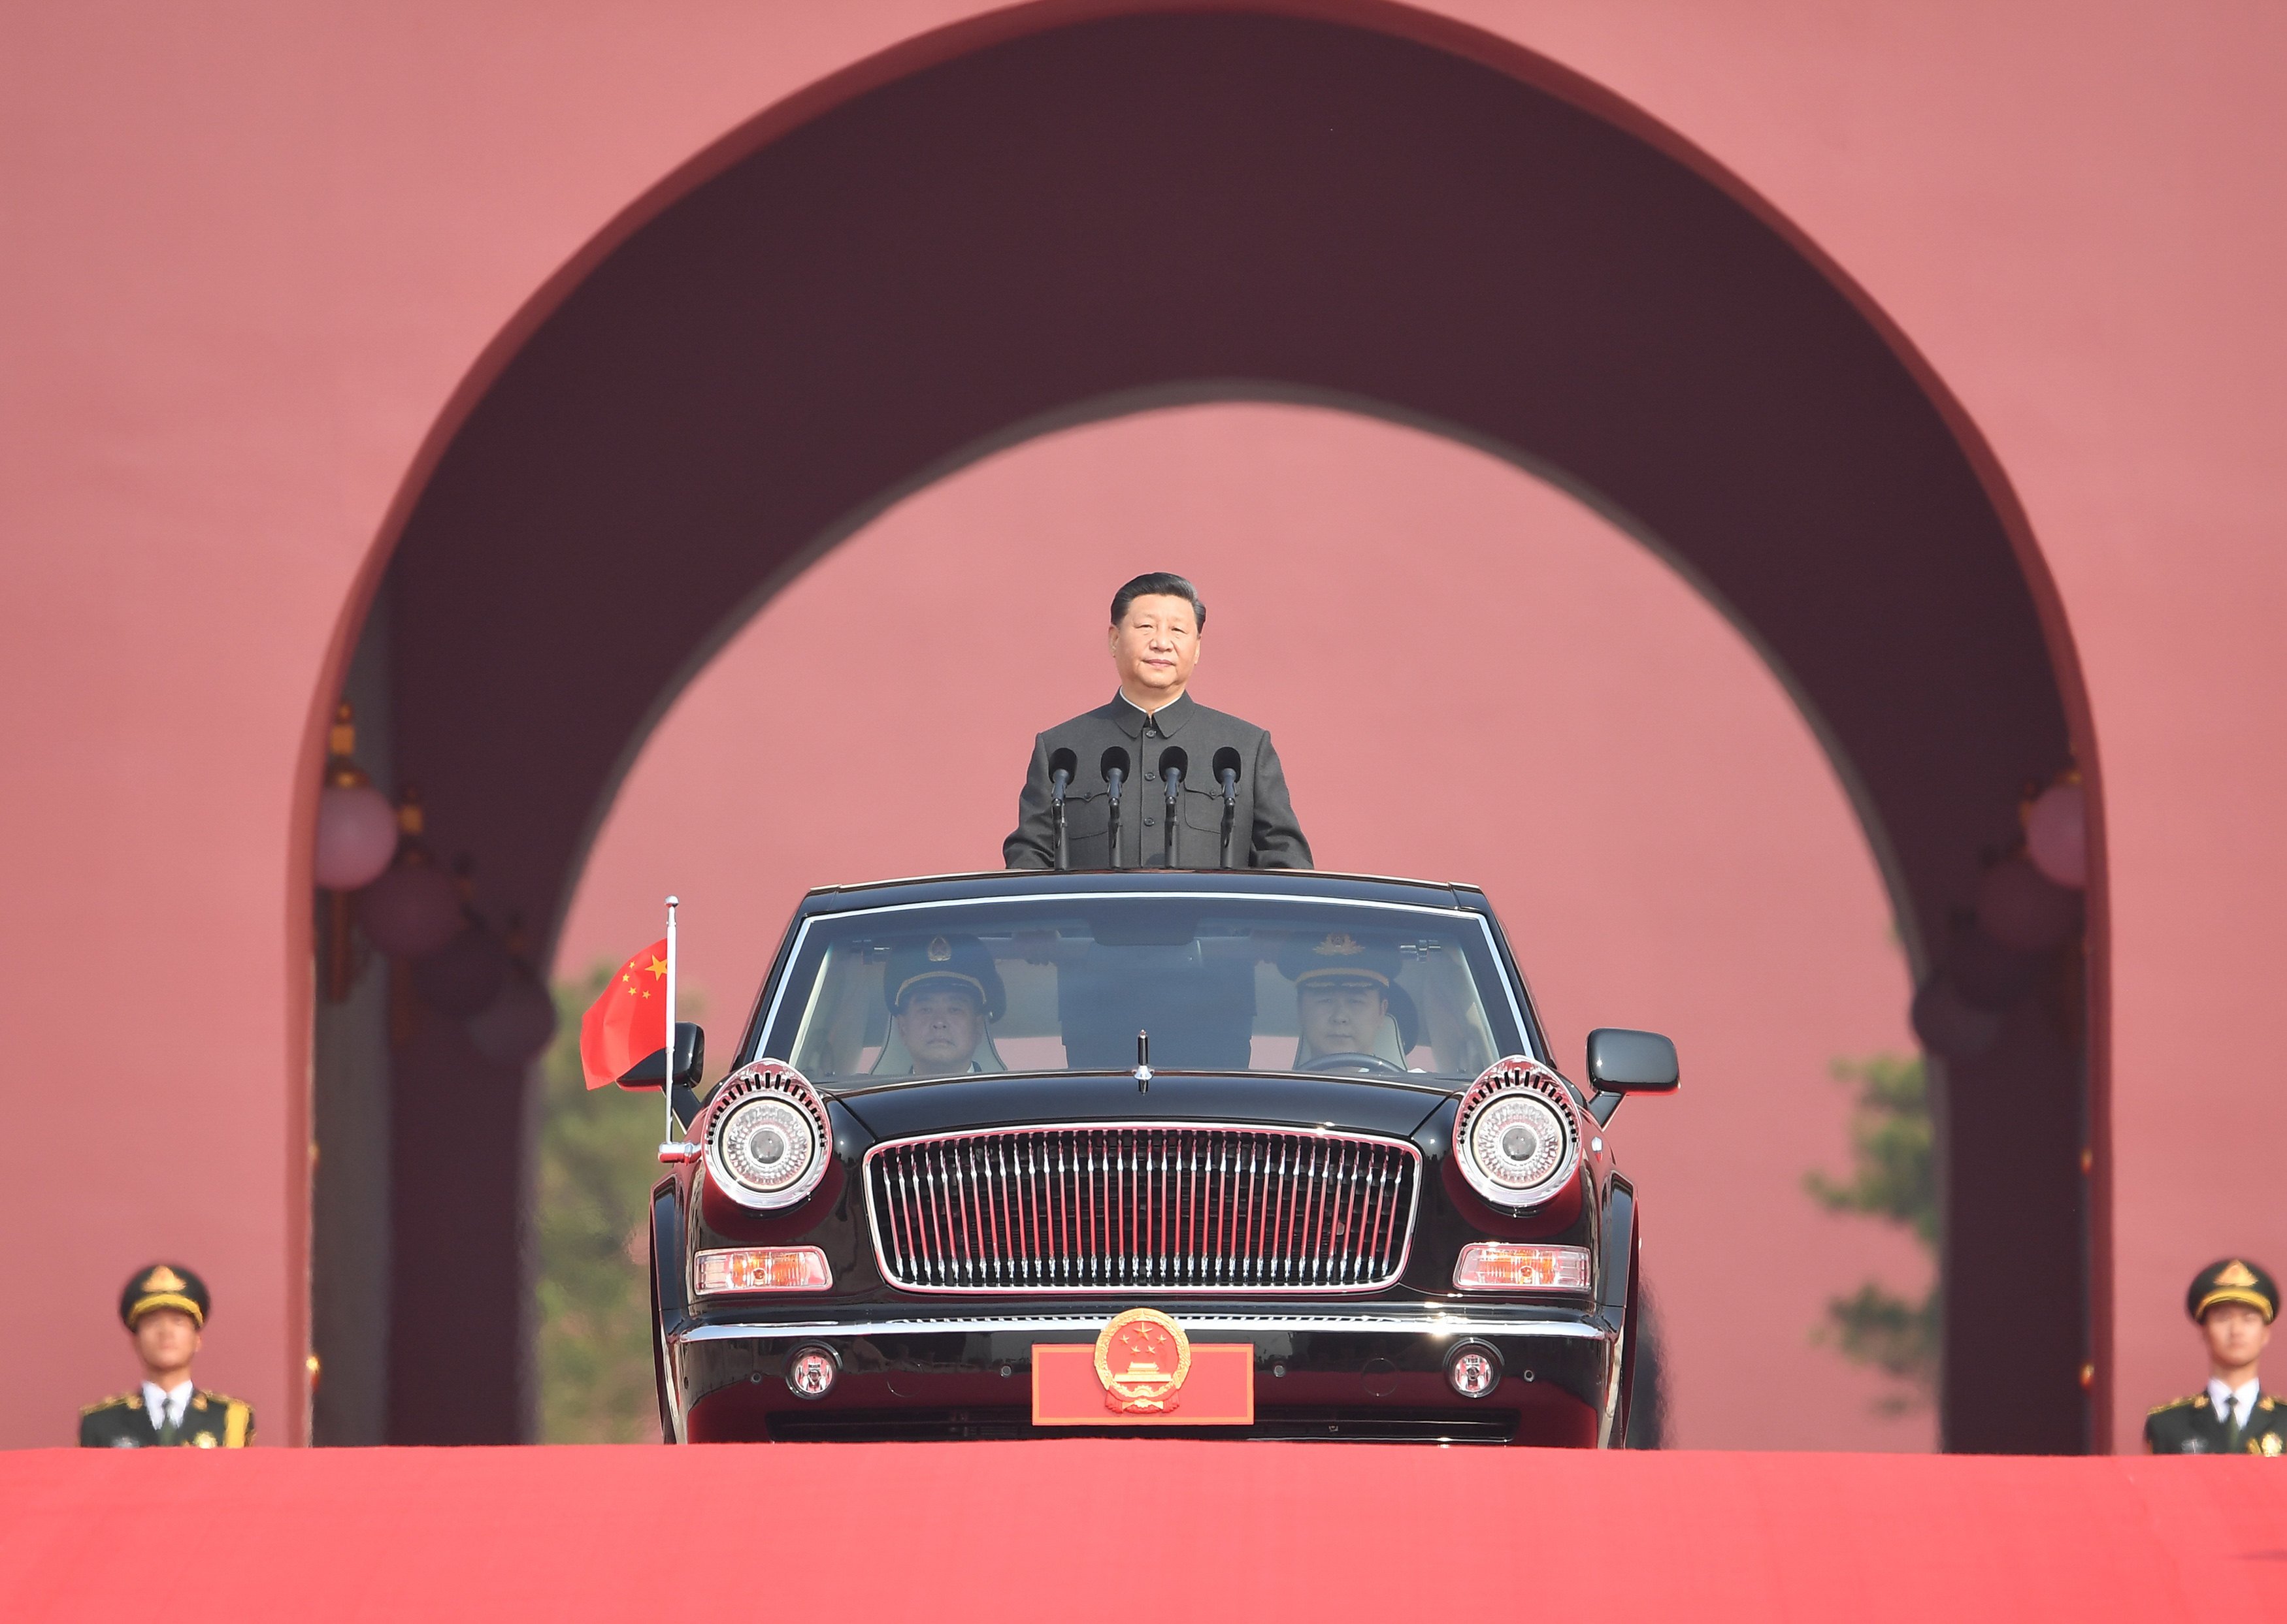 Xi Jinping, general secretary of the Central Committee of the Communist Party of China, Chinese president and chairman of the Central Military Commission, is ready for a National Day review of the armed forces as a limousine carrying him drives out of the Tiananmen Rostrum during the celebrations for the 70th anniversary of the founding of the People’s Republic of China in Beijing on October 1, 2019. Photo: Xinhua